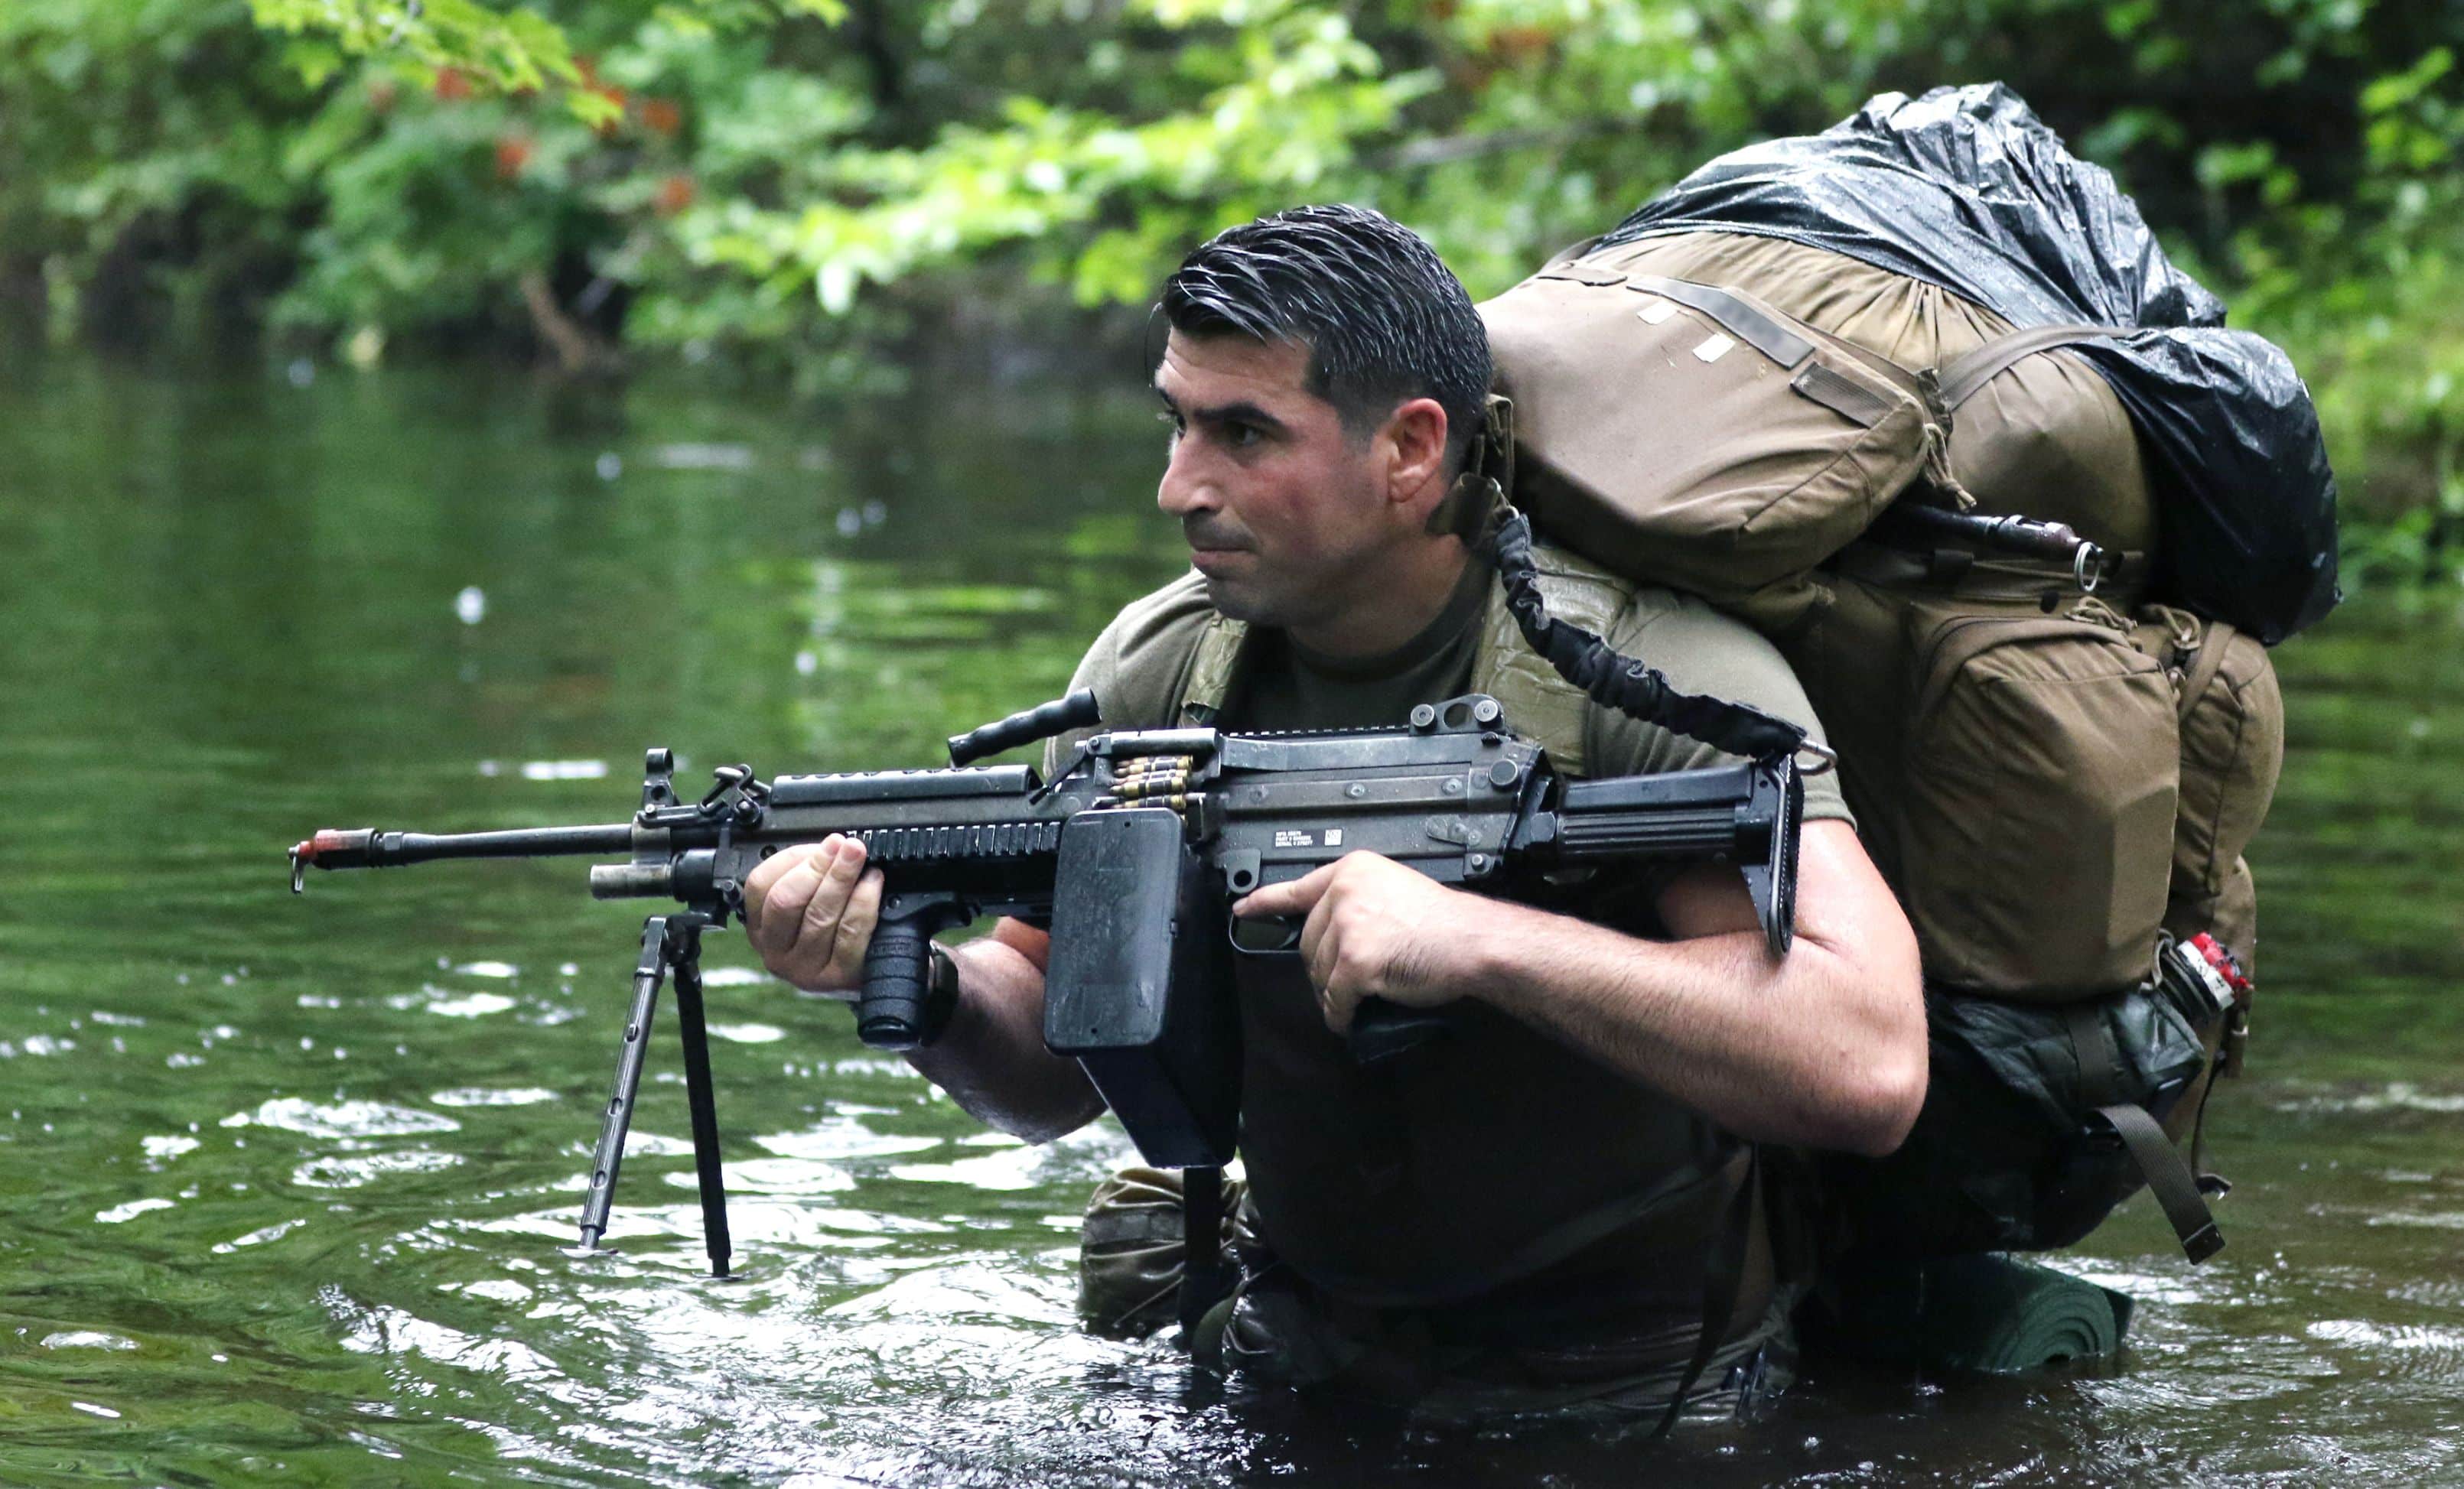 A Special Forces candidate assigned to the U.S. Army John F. Kennedy Special Warfare Center and School crosses a water obstacle during the final phase of field training known as Robin Sage in central North Carolina, July 9, 2019. Robin Sage is the culmination exercise and has been the litmus test for Soldiers striving to earn the Green Beret for more than 40 years. (U.S. Army photo illustration by K. Kassens)